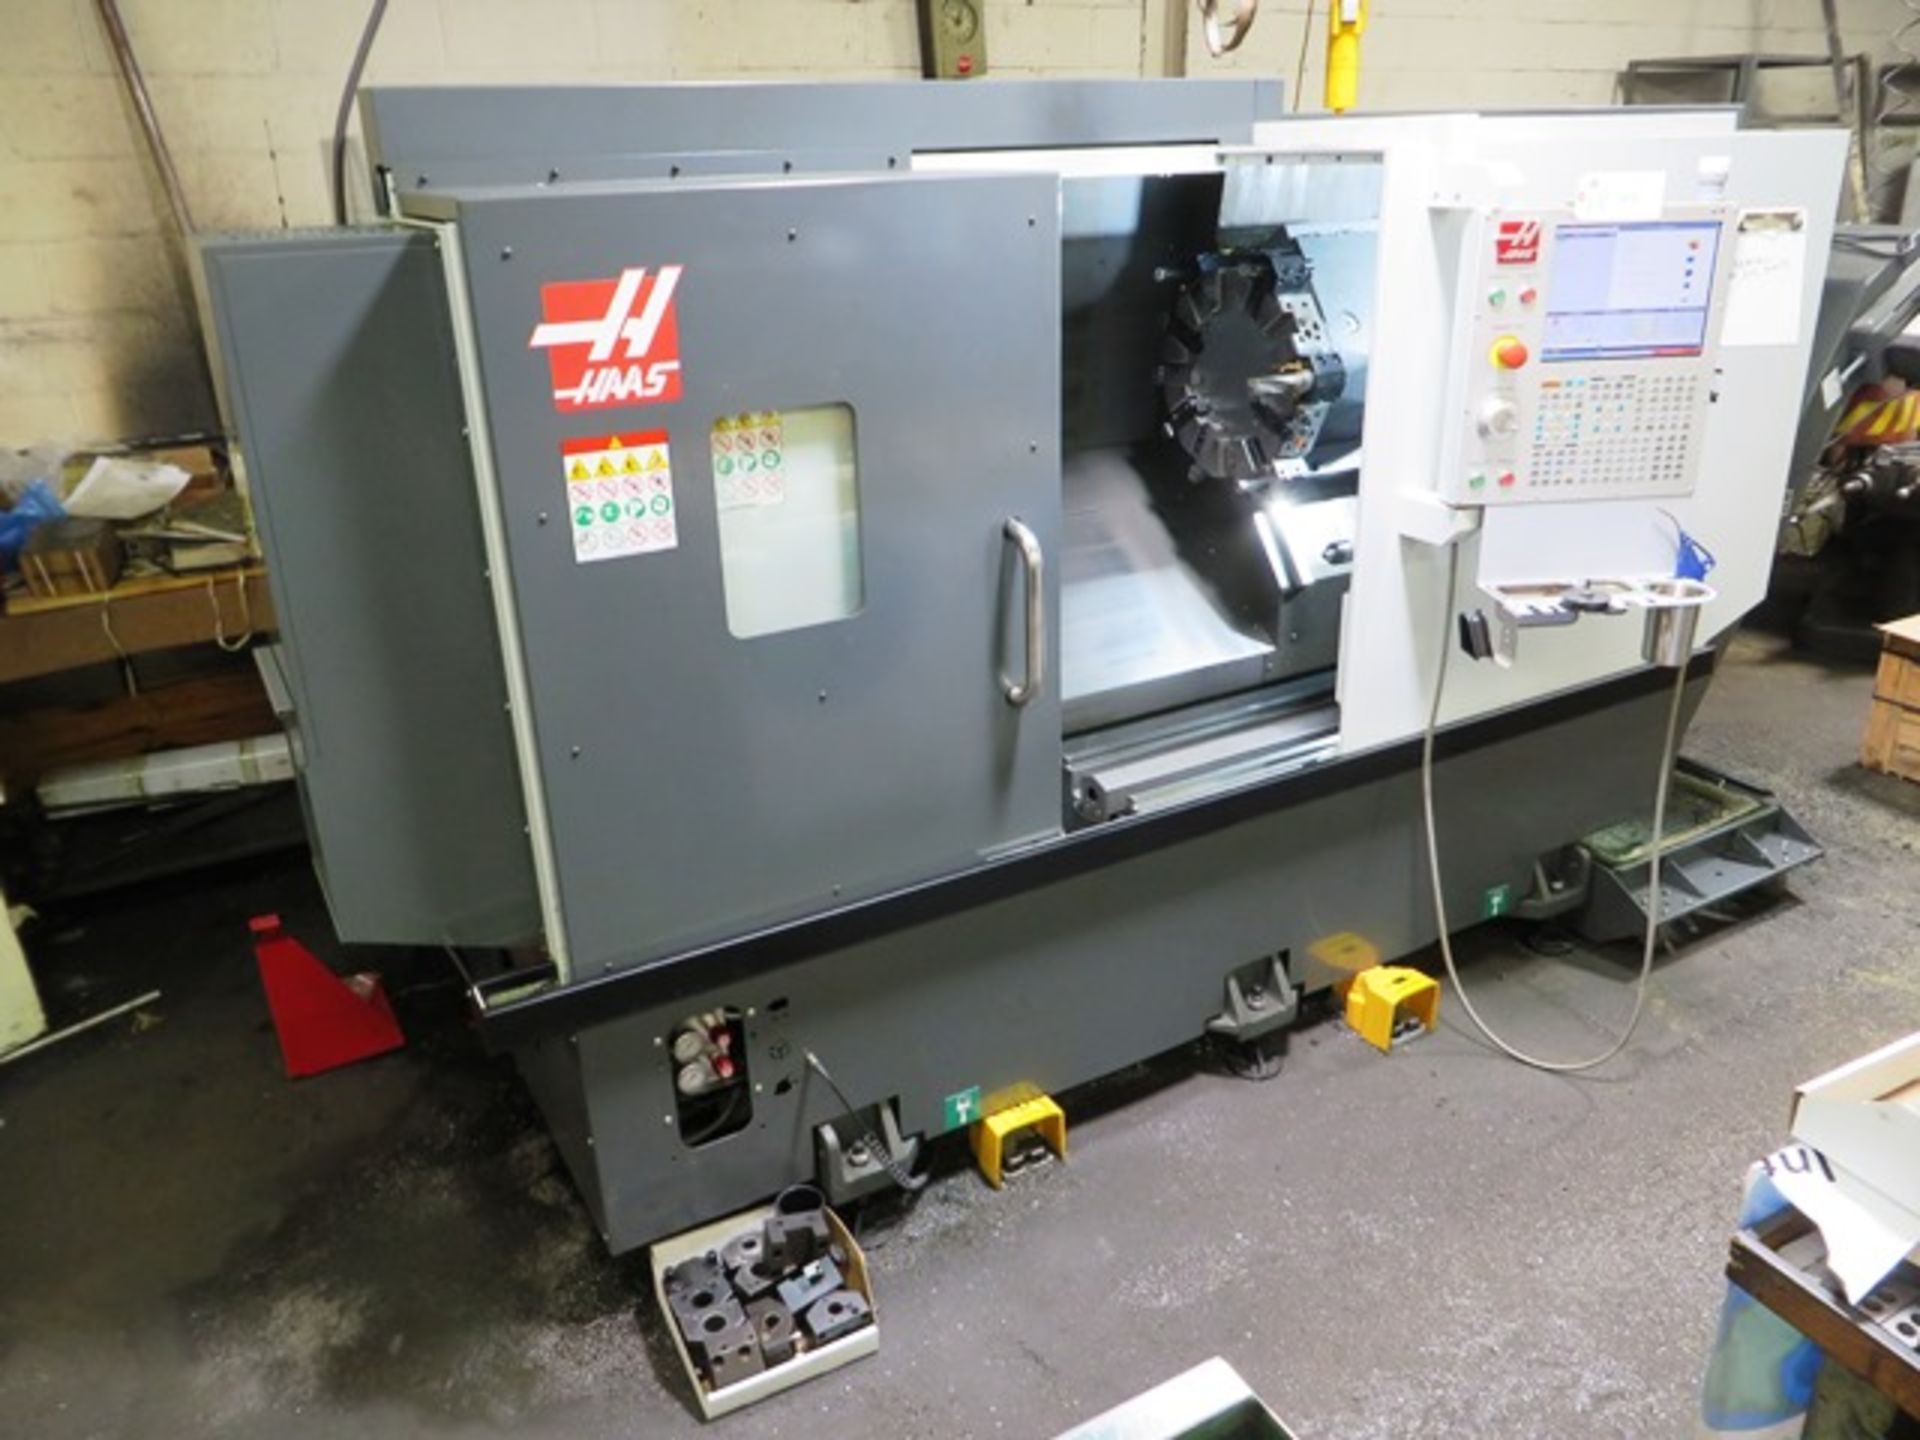 Haas ST-30 CNC Turning Center